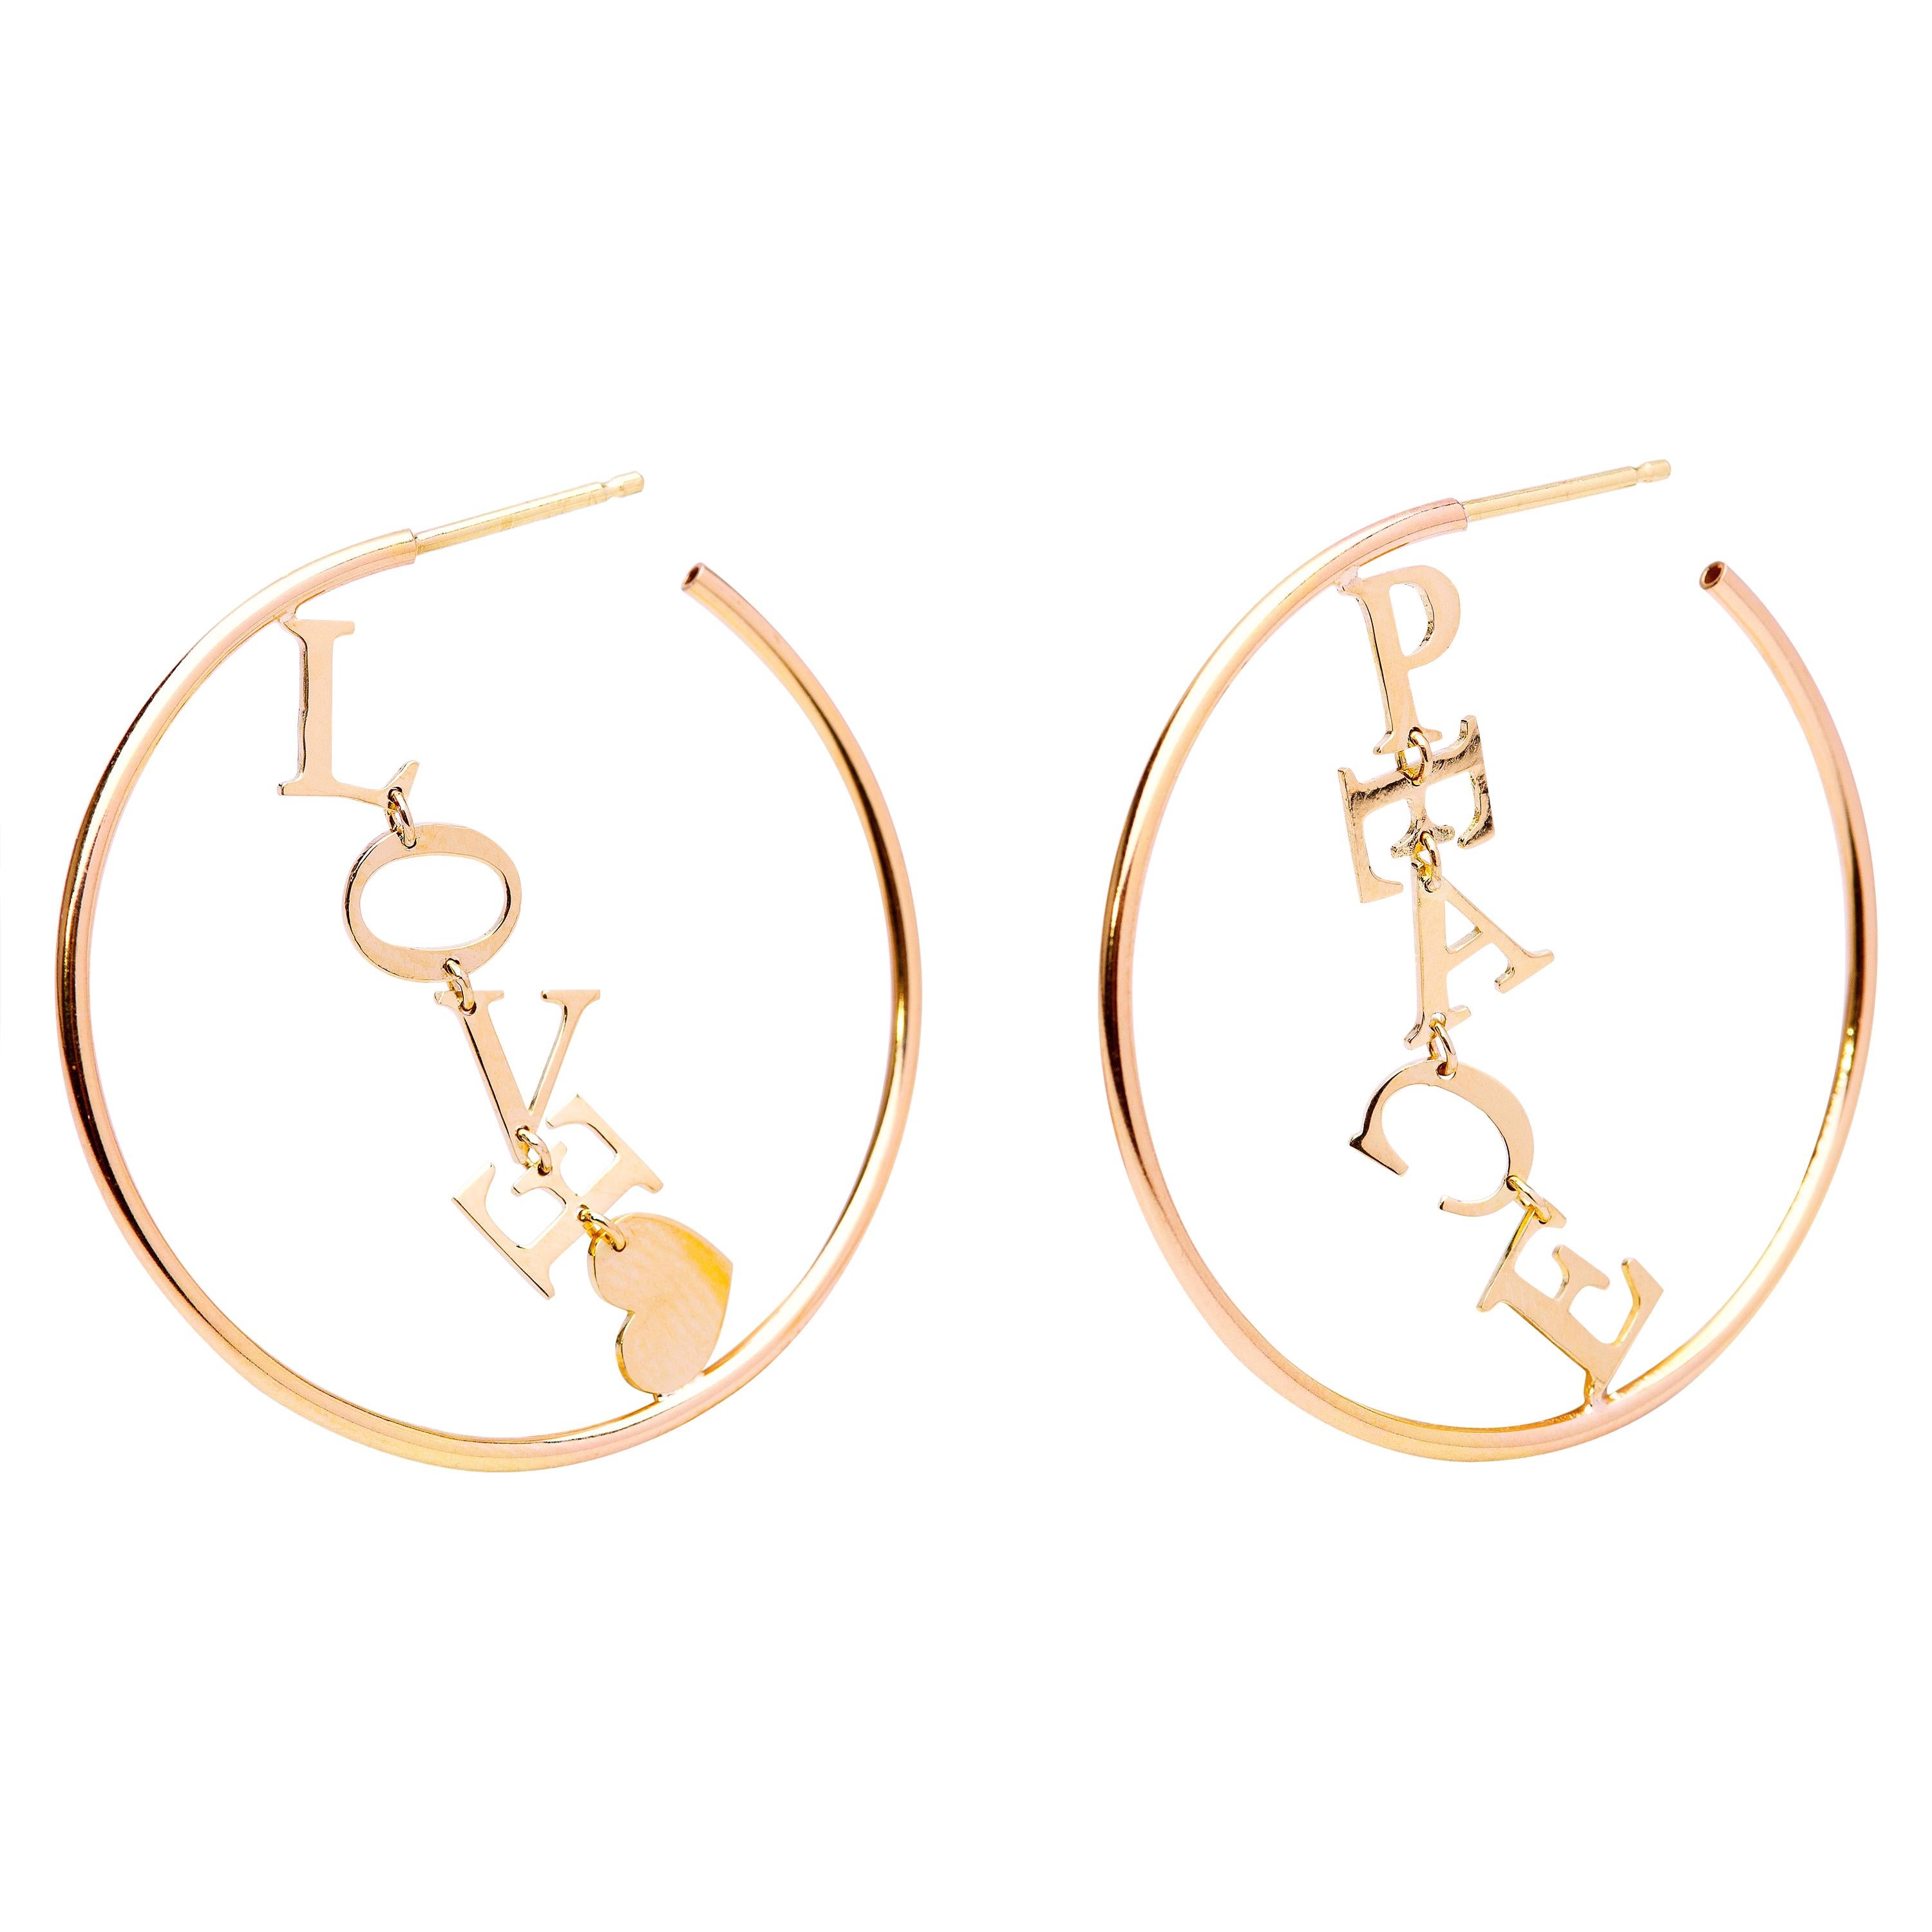 Modernist 18 Karat Yellow Gold Circle "Love and Peace" Hoops Earrings For Sale